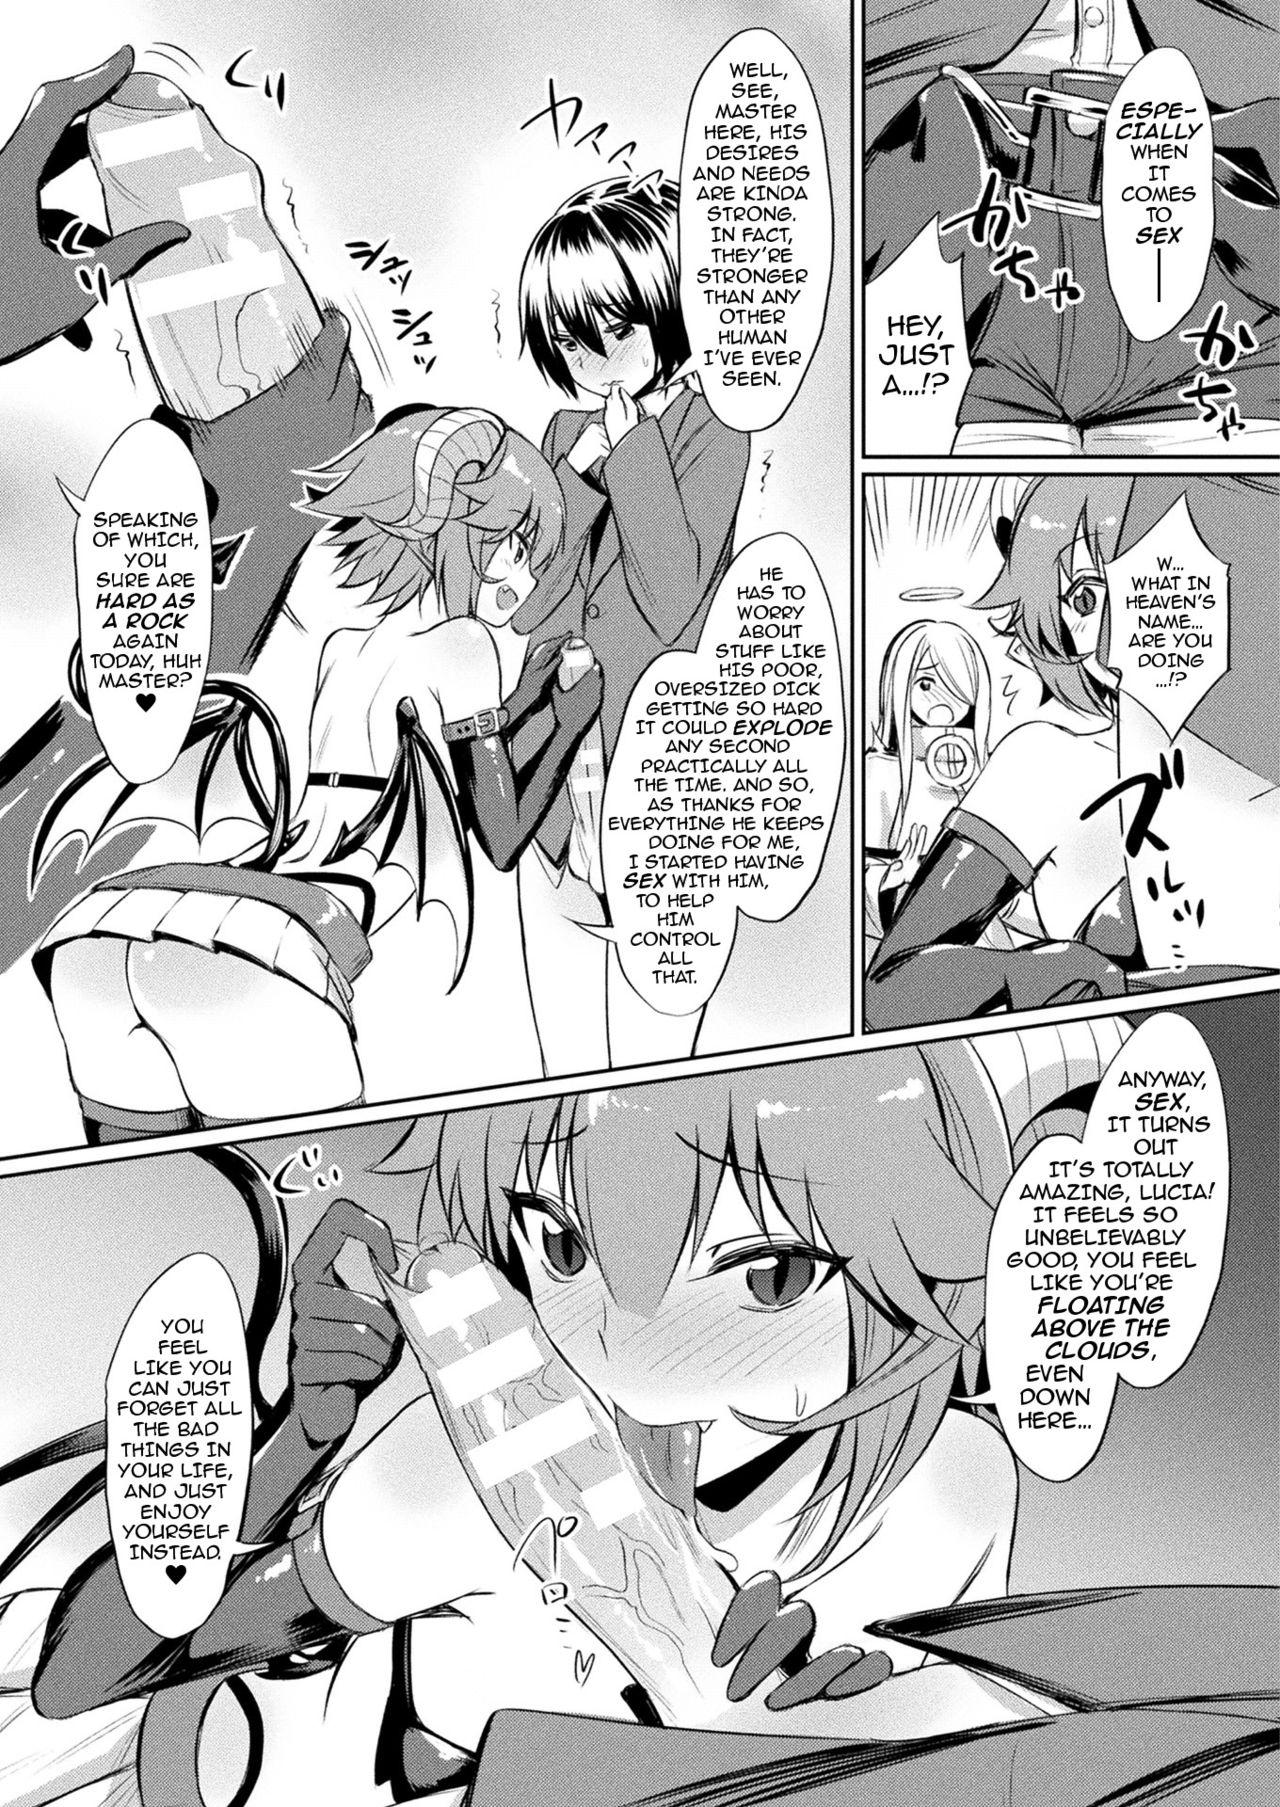 Small Boobs Kimochii Rakuten Shiyo | Let’s Enjoy the Pleasures of FALLING FROM GRACE Together Cumming - Page 5